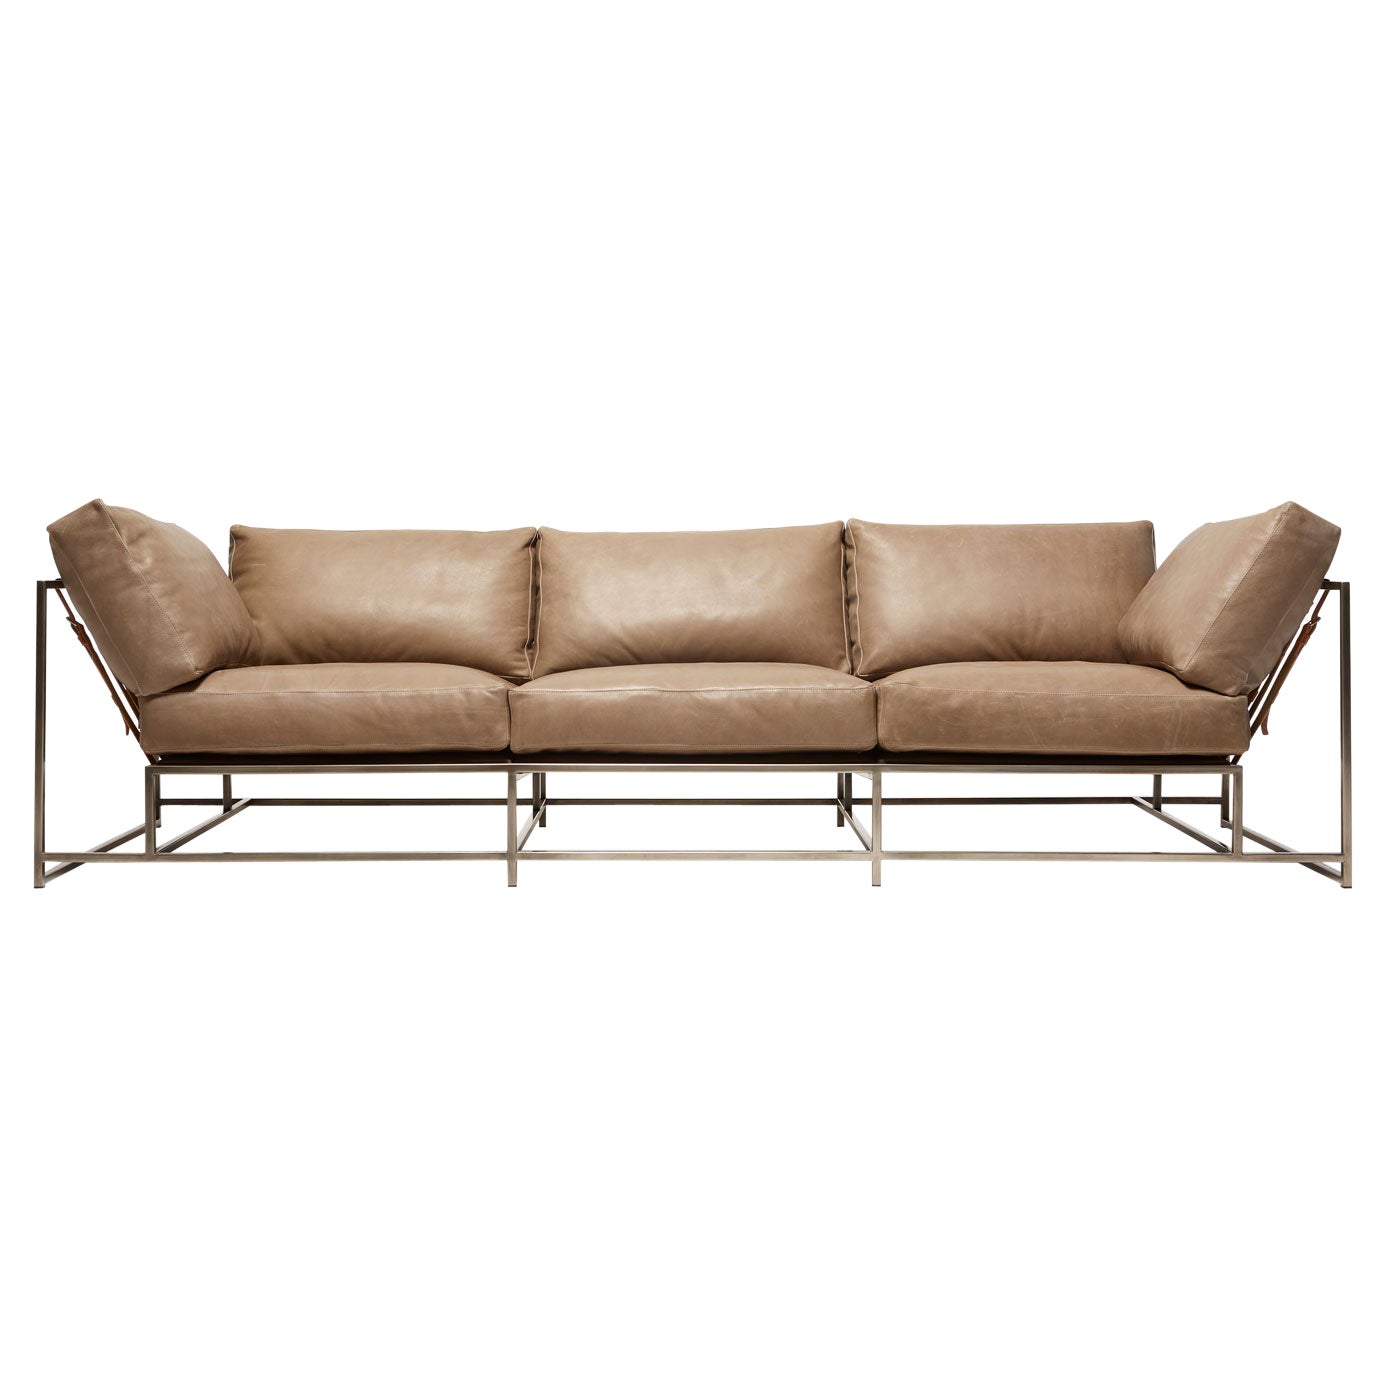 Pebbled Taupe Leather & Antique Nickel Sofa For Sale